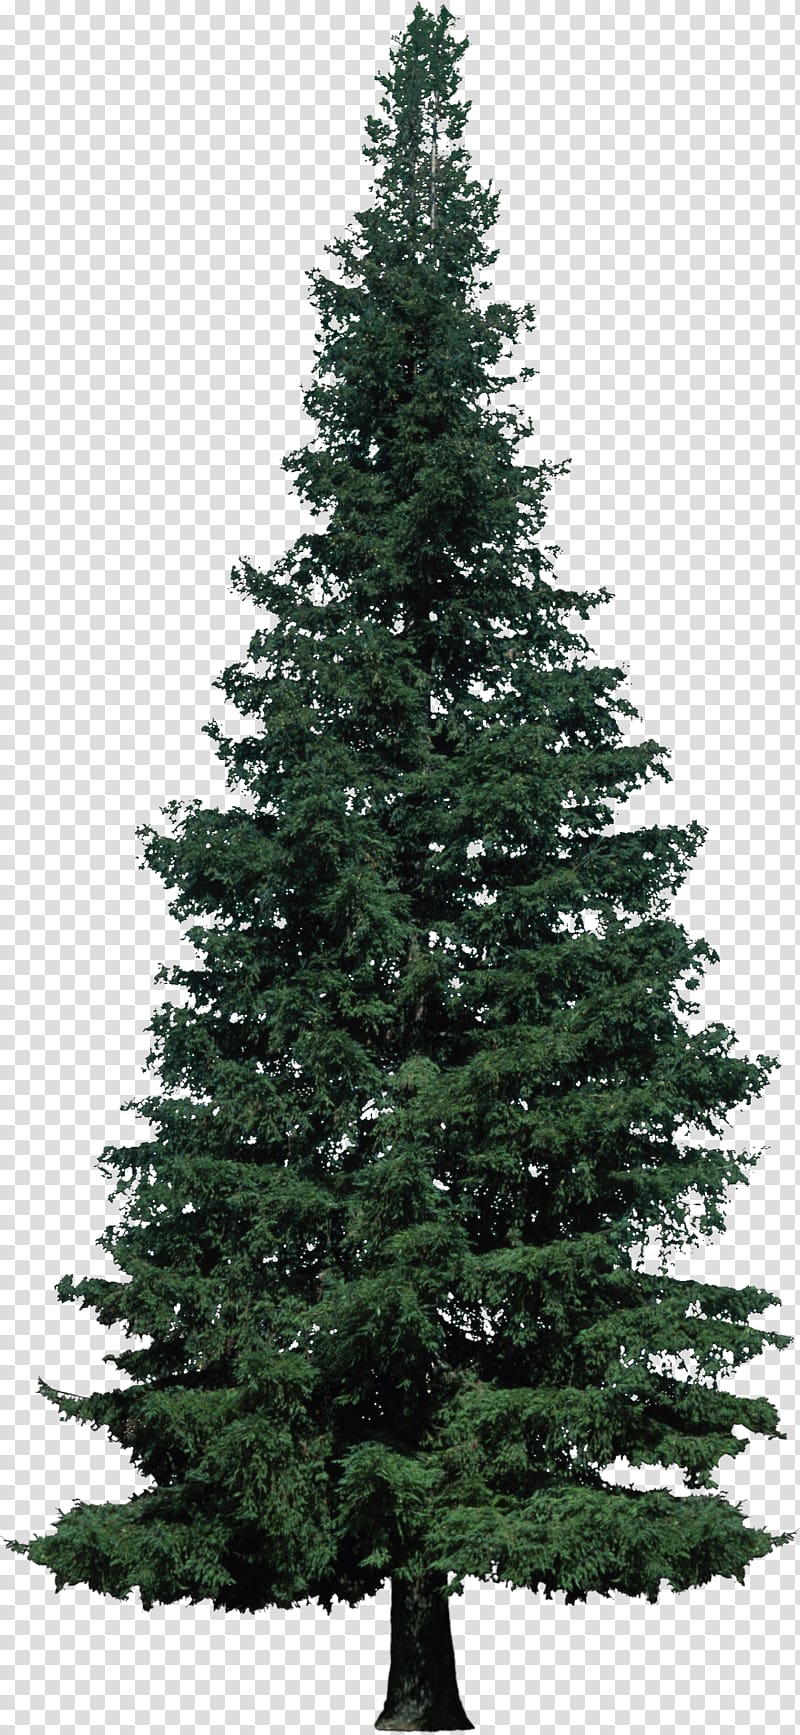 Artificial Christmas tree Balsam Hill, Bush transparent background PNG clipart